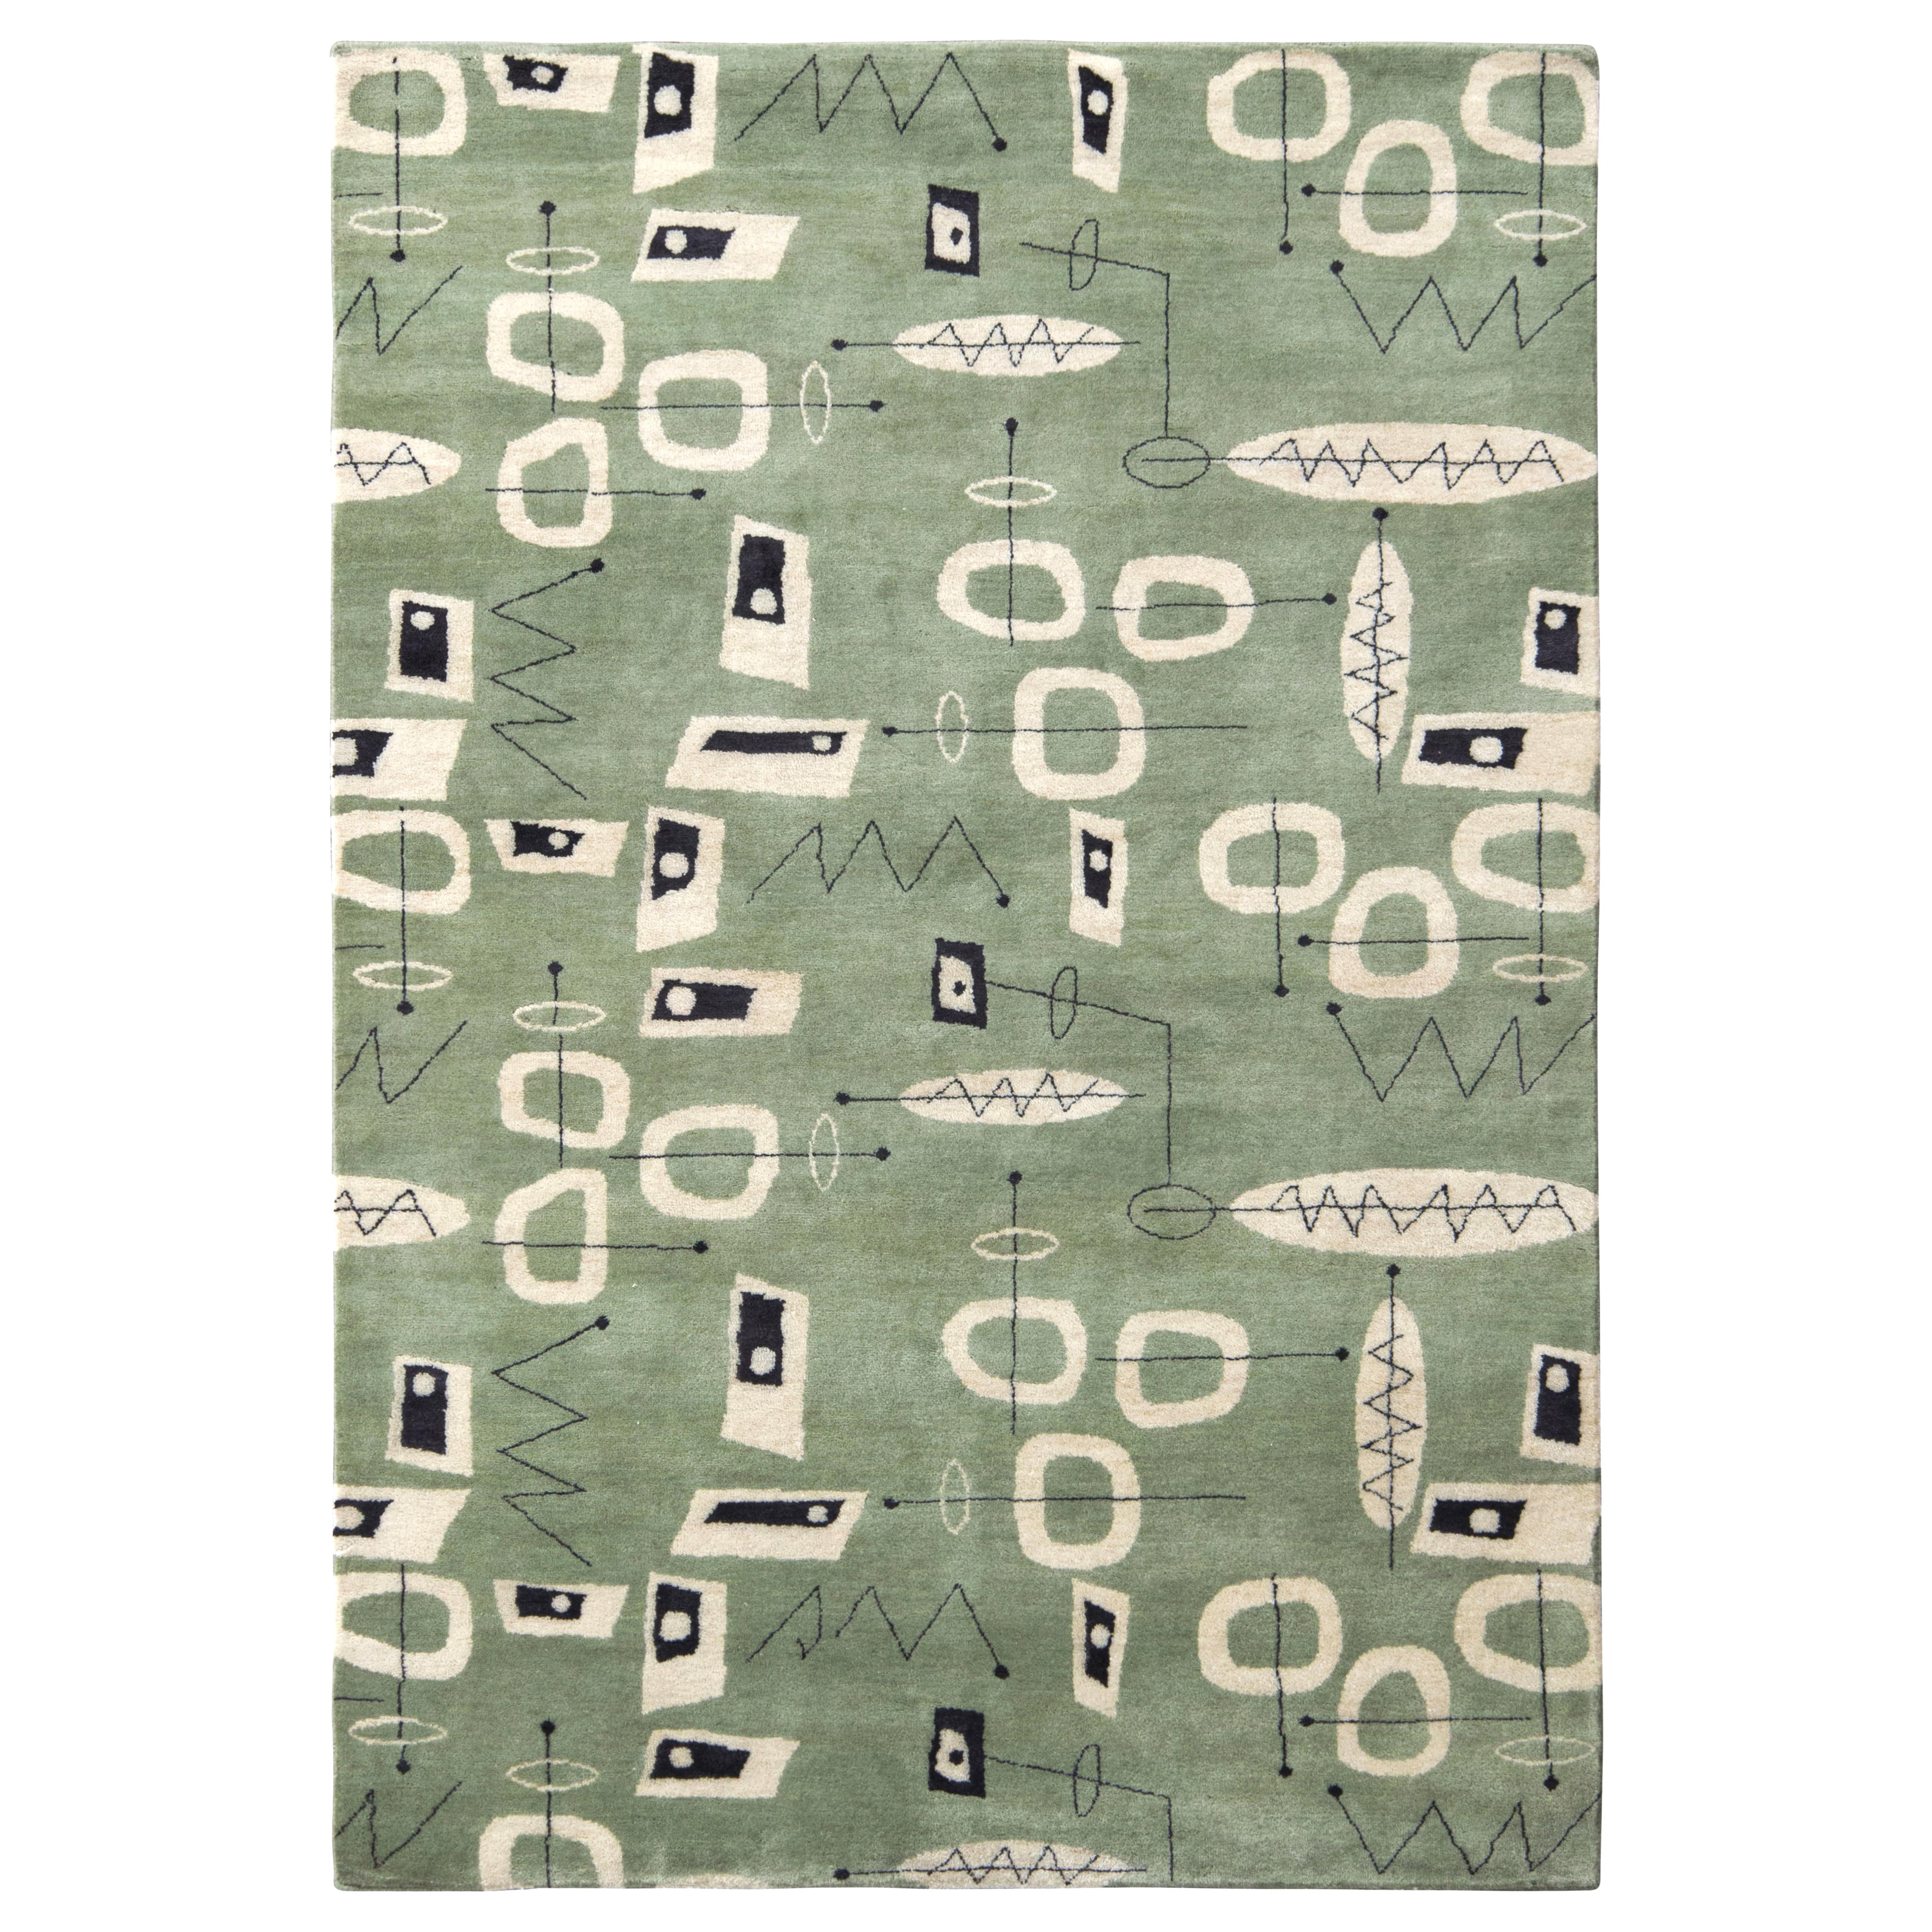 Hand-knotted in wool and all natural silk, this modern 4×6 rug hails from the latest additions to the Mid-Century Modern Collection by Rug & Kilim — the first representation of varied 1950s post-modern styles in luxury rugs with a new approach to